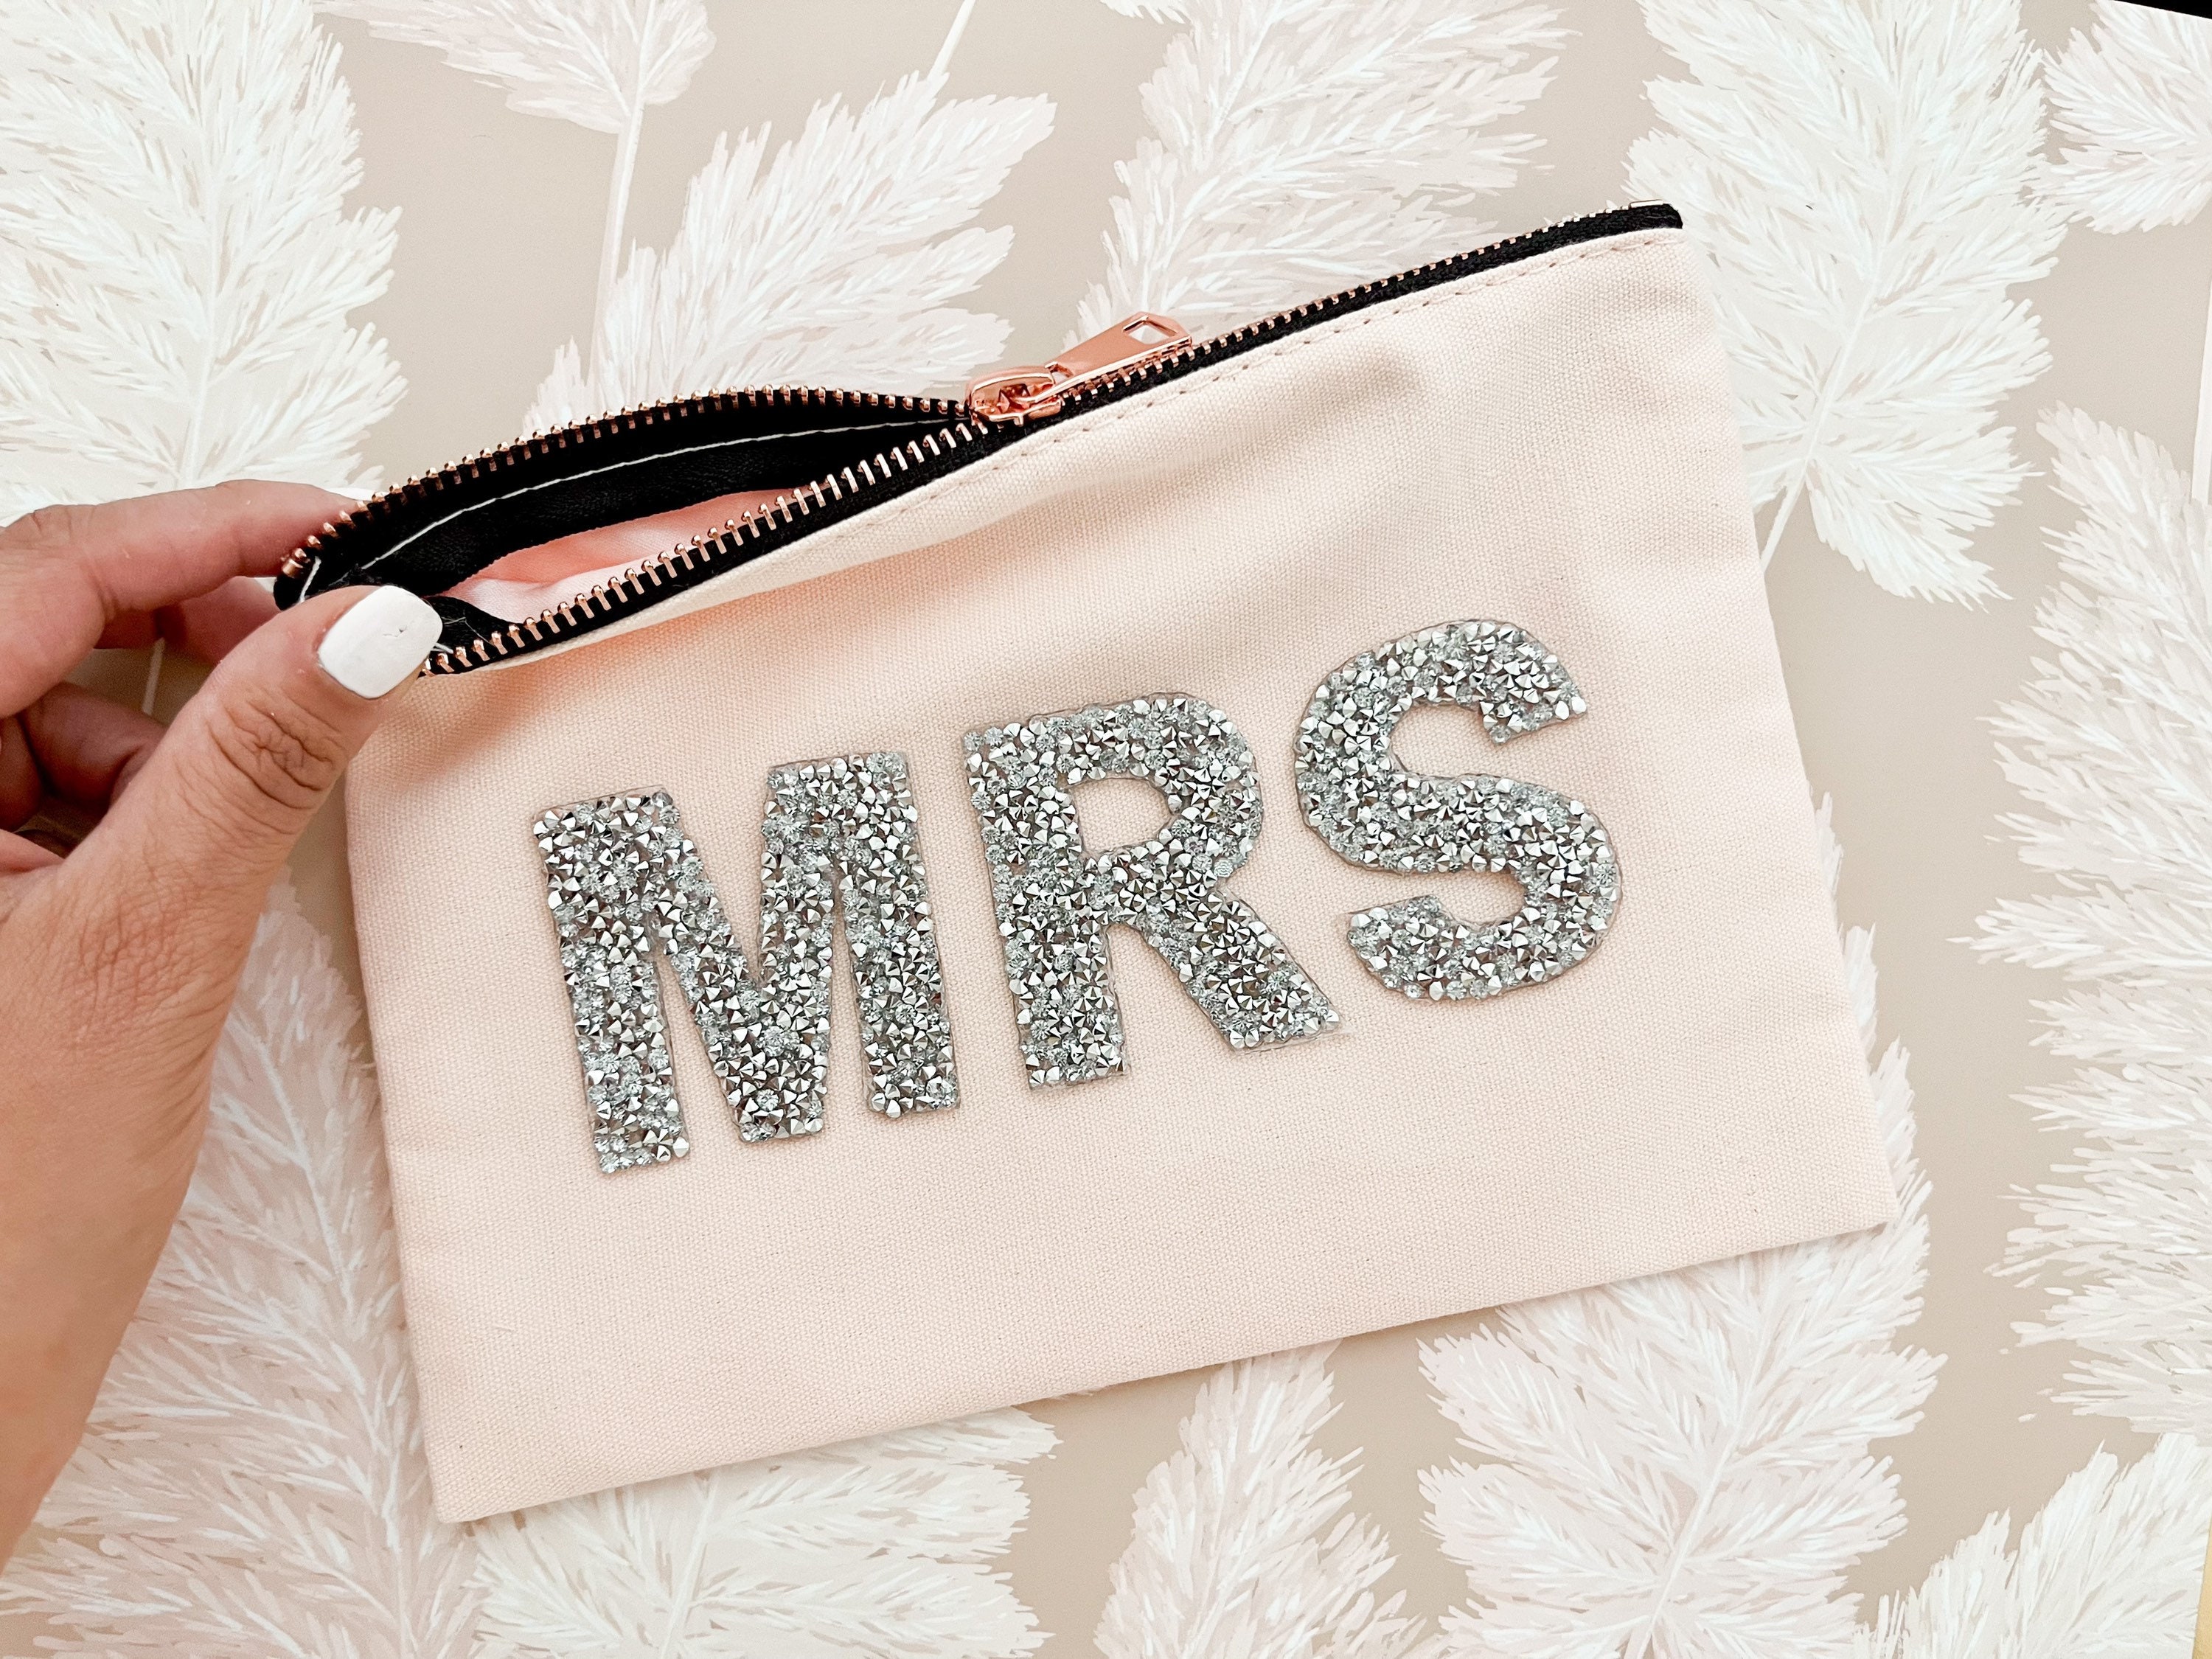 MRS Makeup Bag Bride to Be Cosmetic Bags Engagement Gifts Etsy